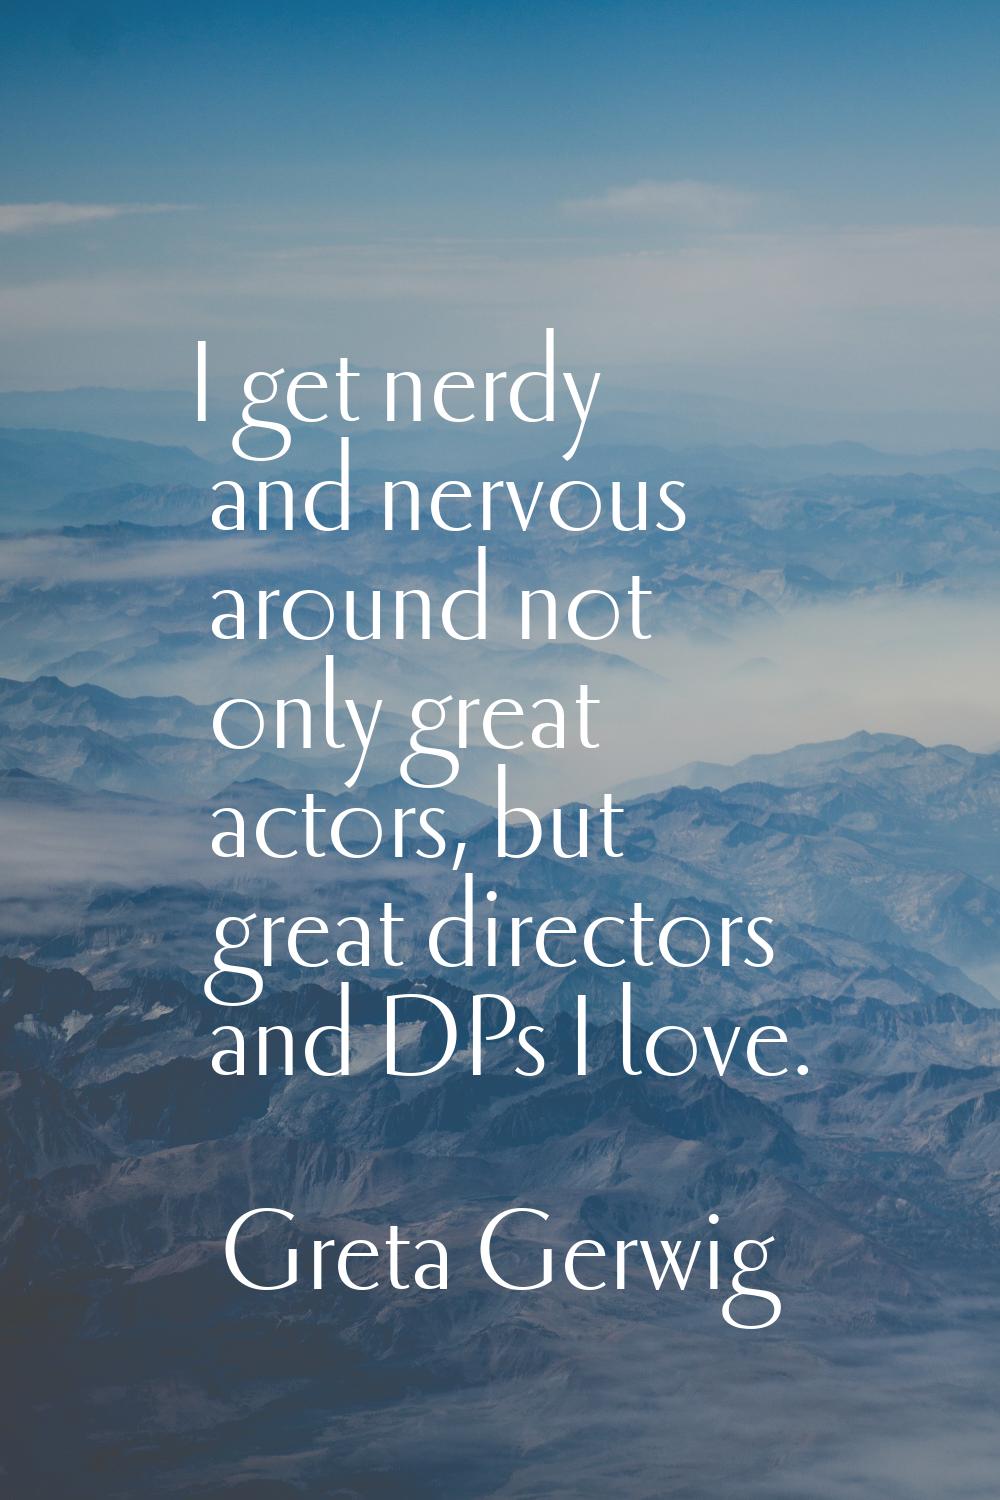 I get nerdy and nervous around not only great actors, but great directors and DPs I love.